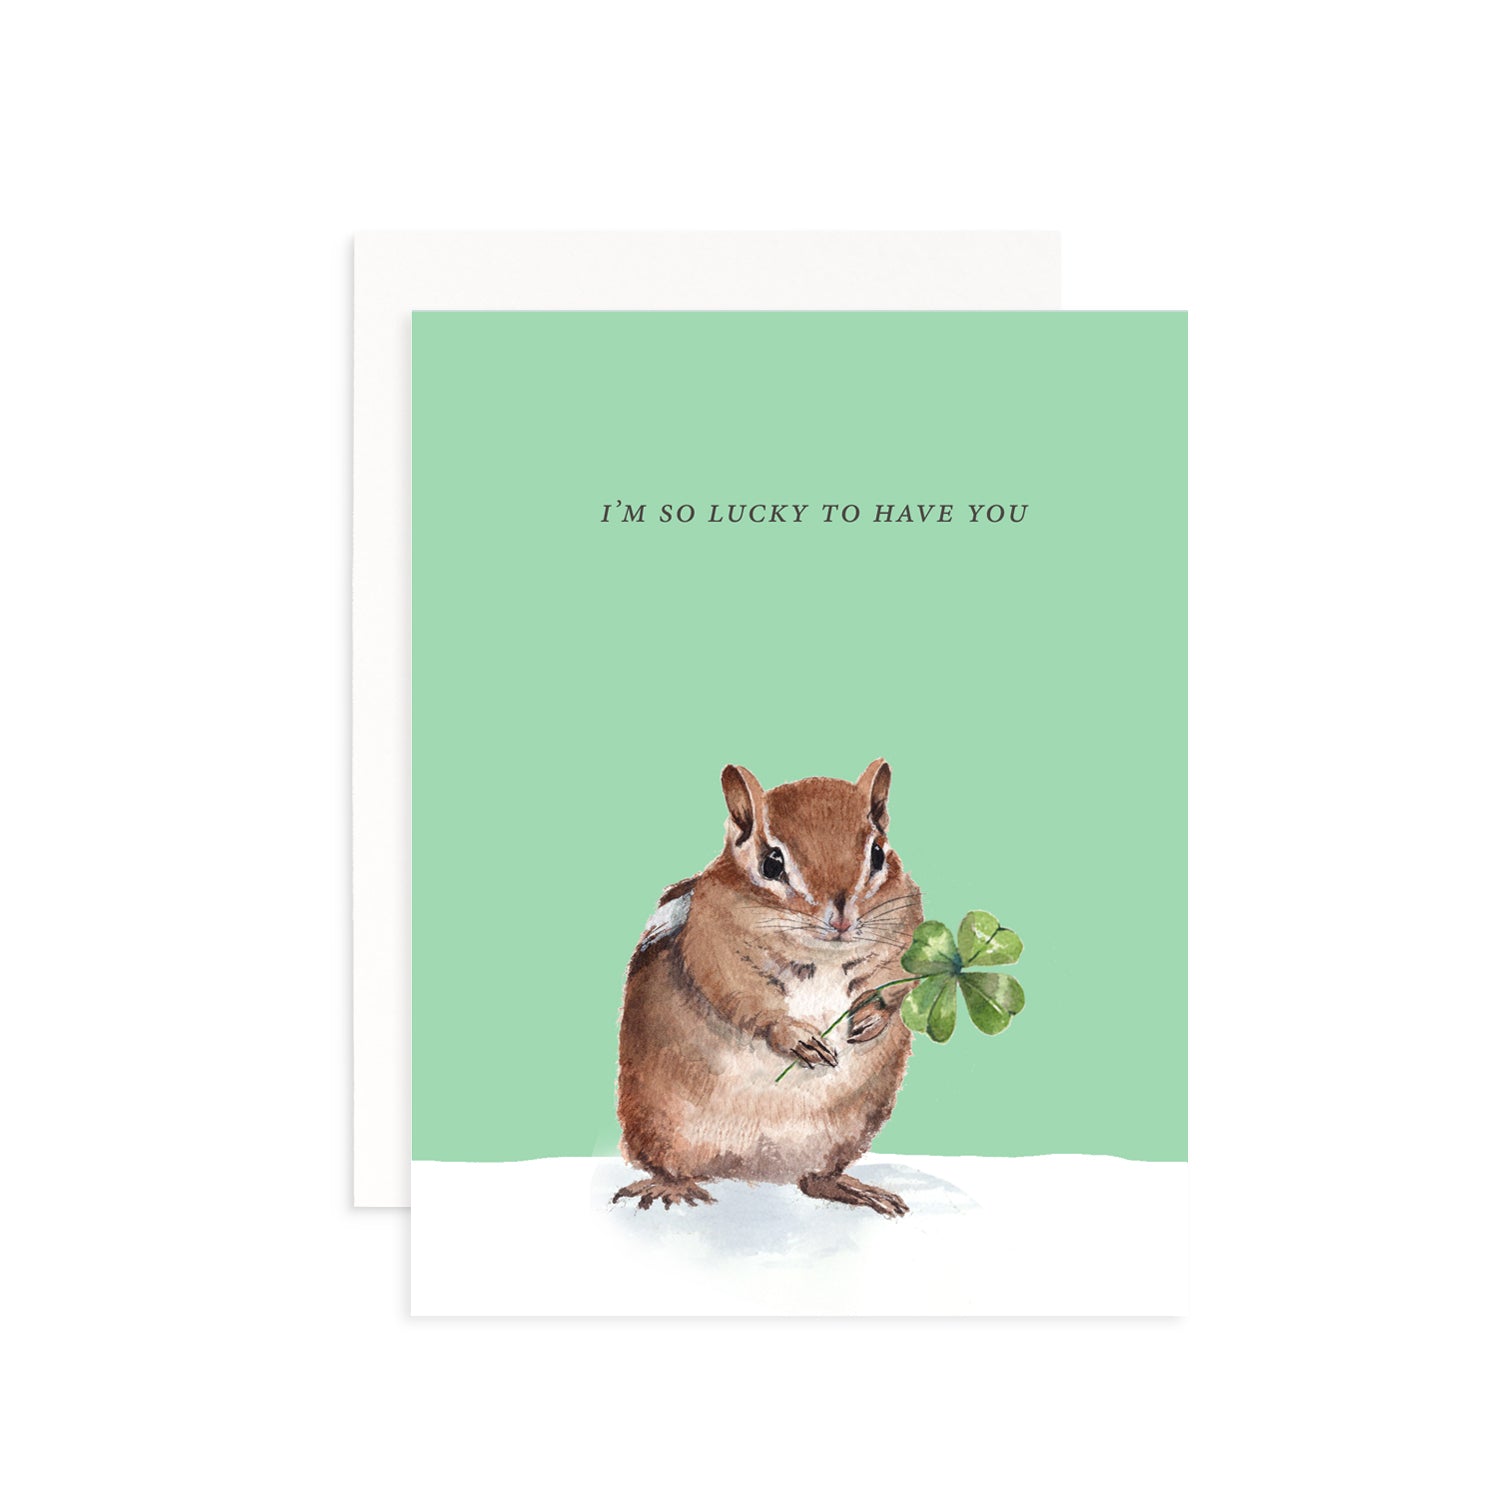 I'm So Lucky to Have You Greeting Card